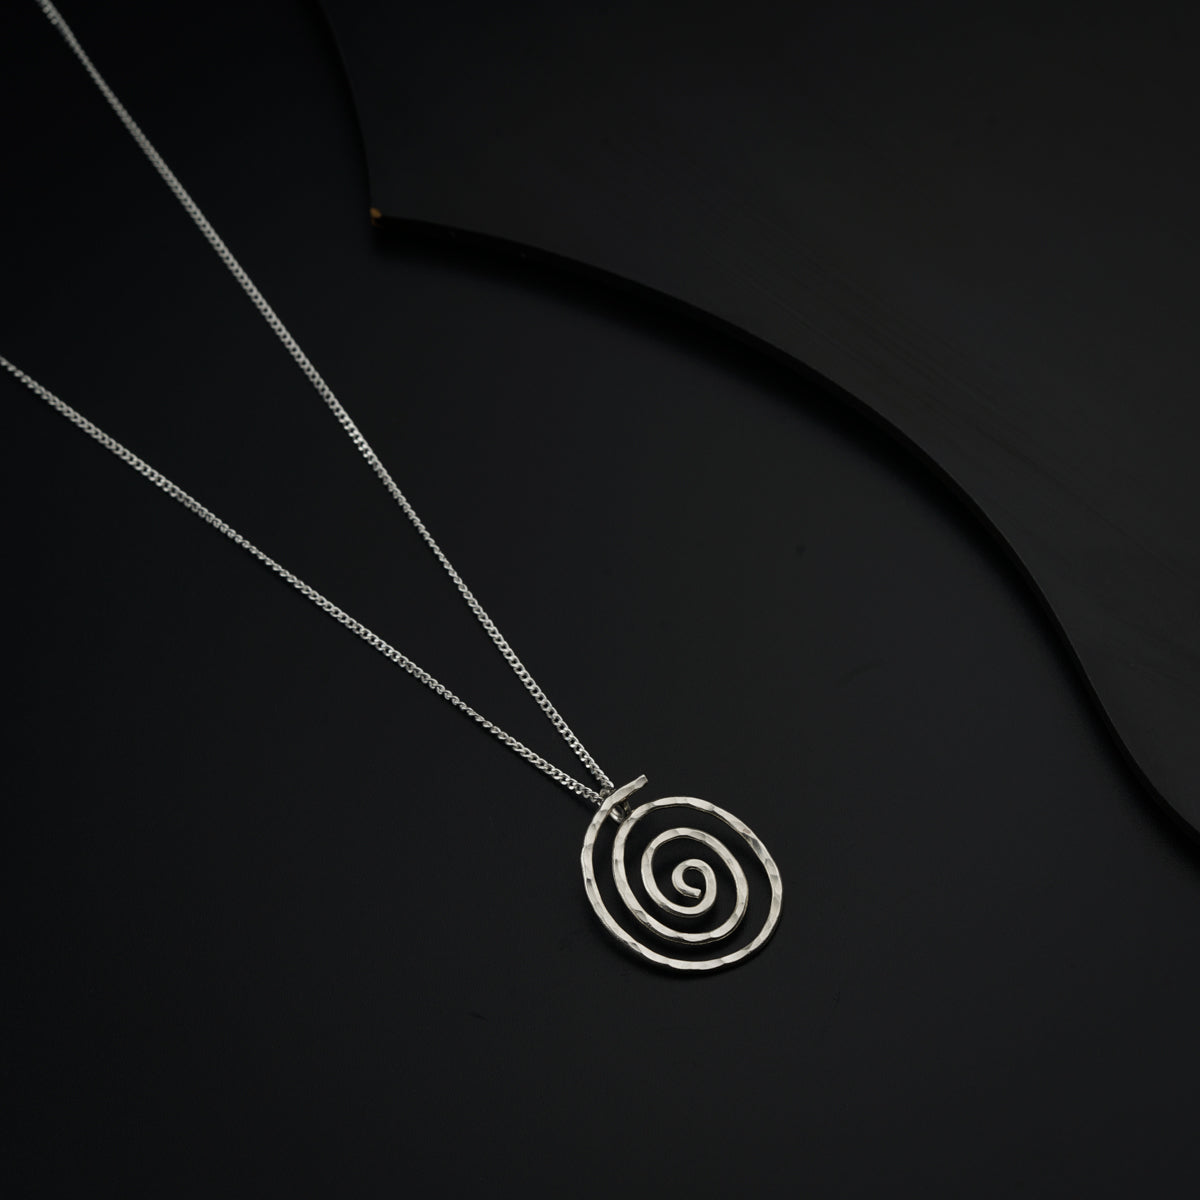 a silver necklace with a spiral design on it